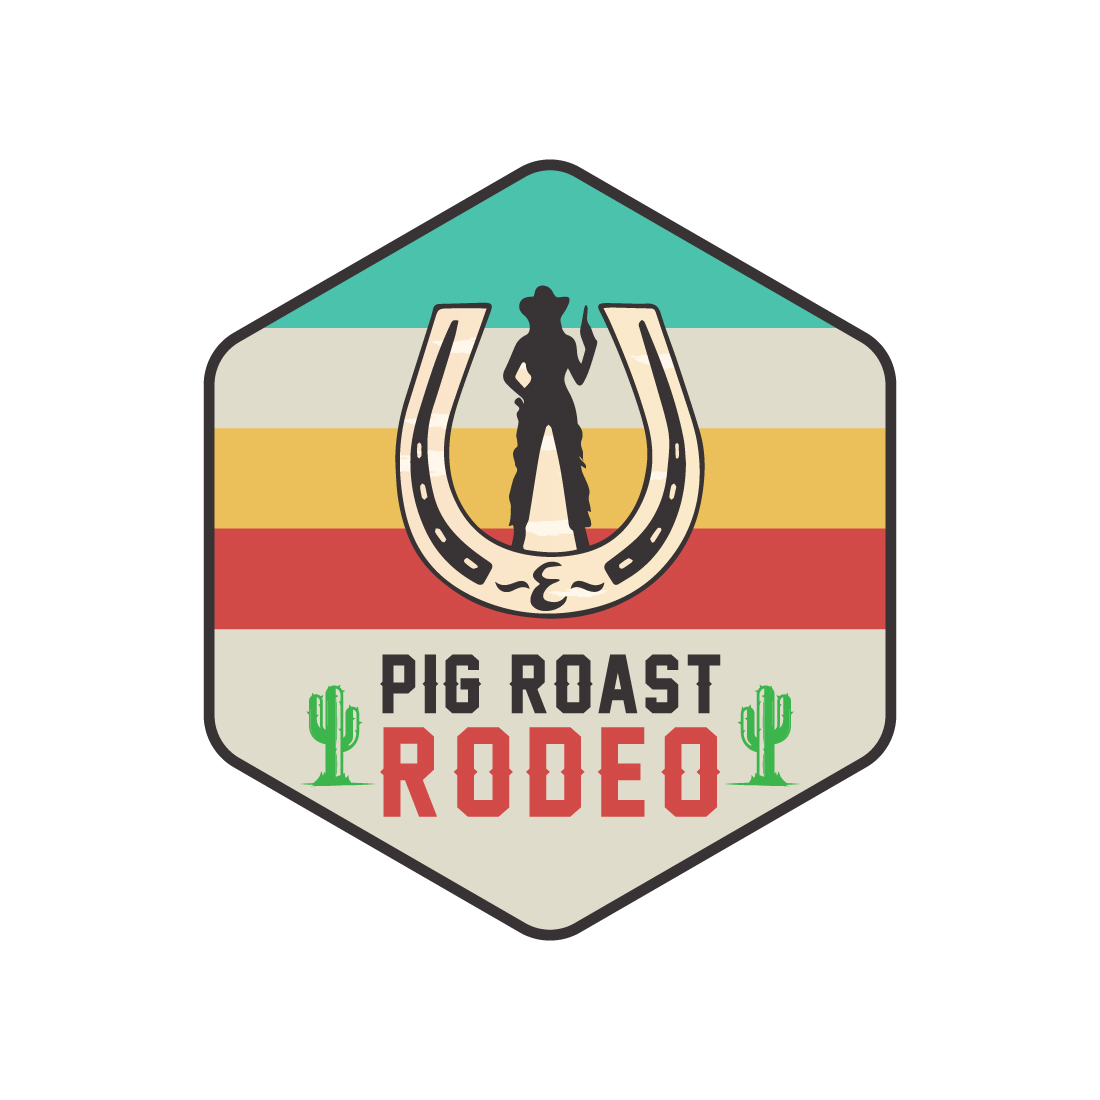 PIG ROAST RODEO preview image.